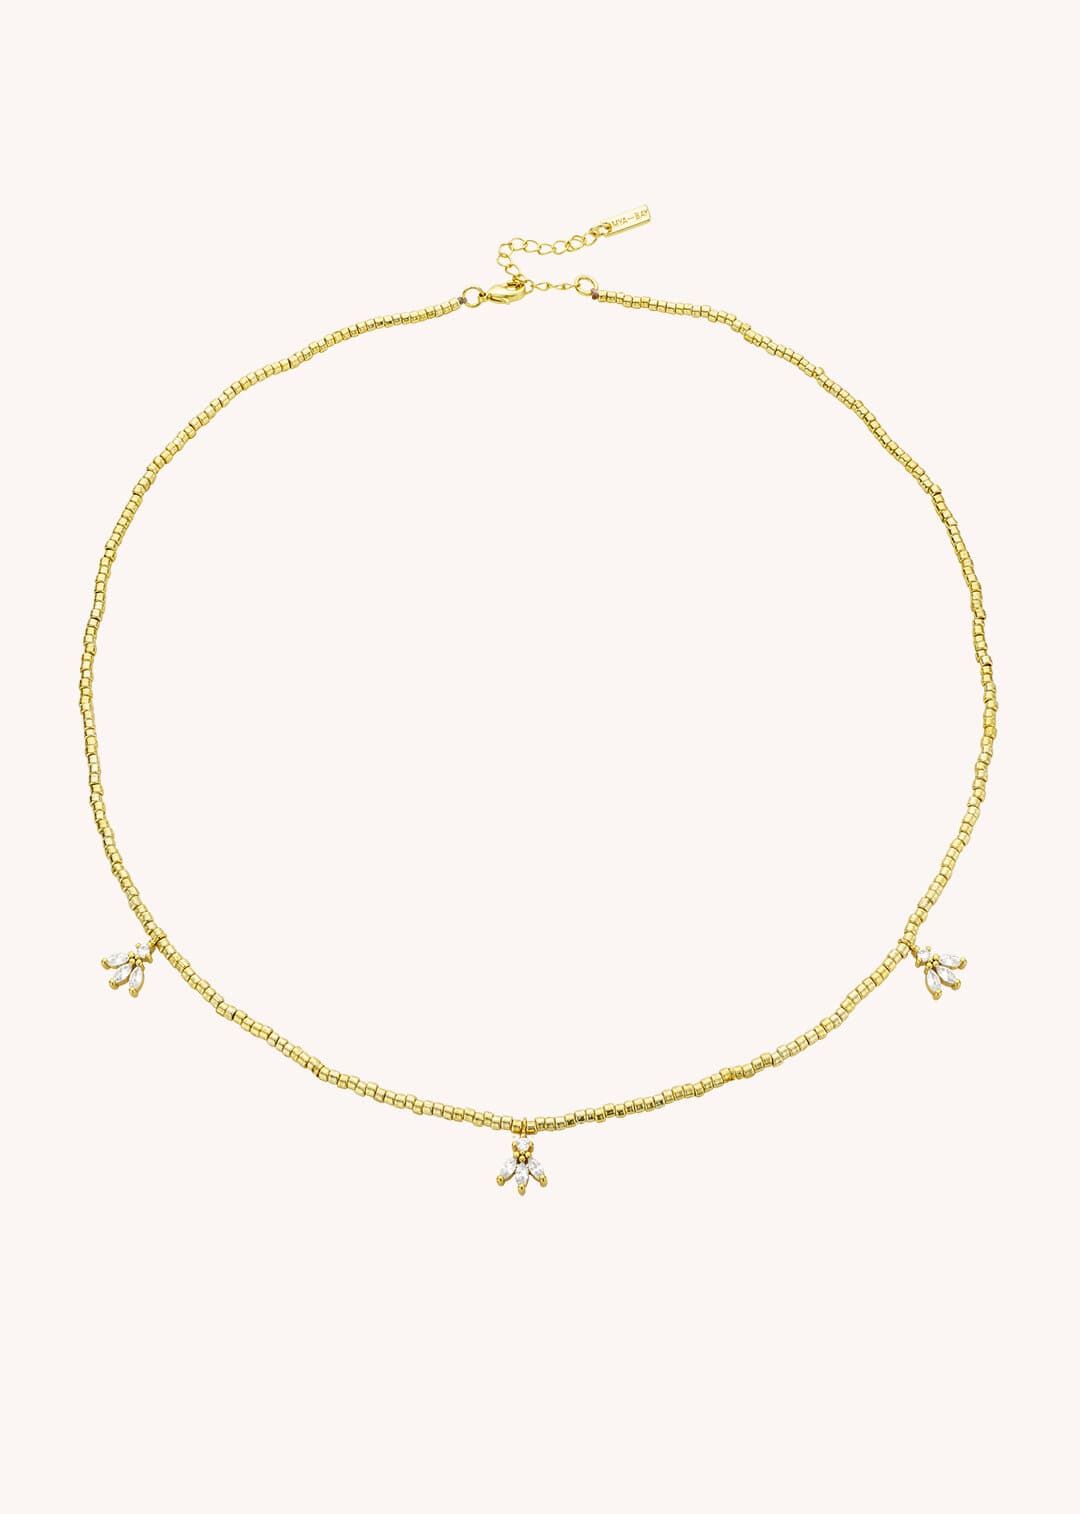 Necklace Co-204g Gold